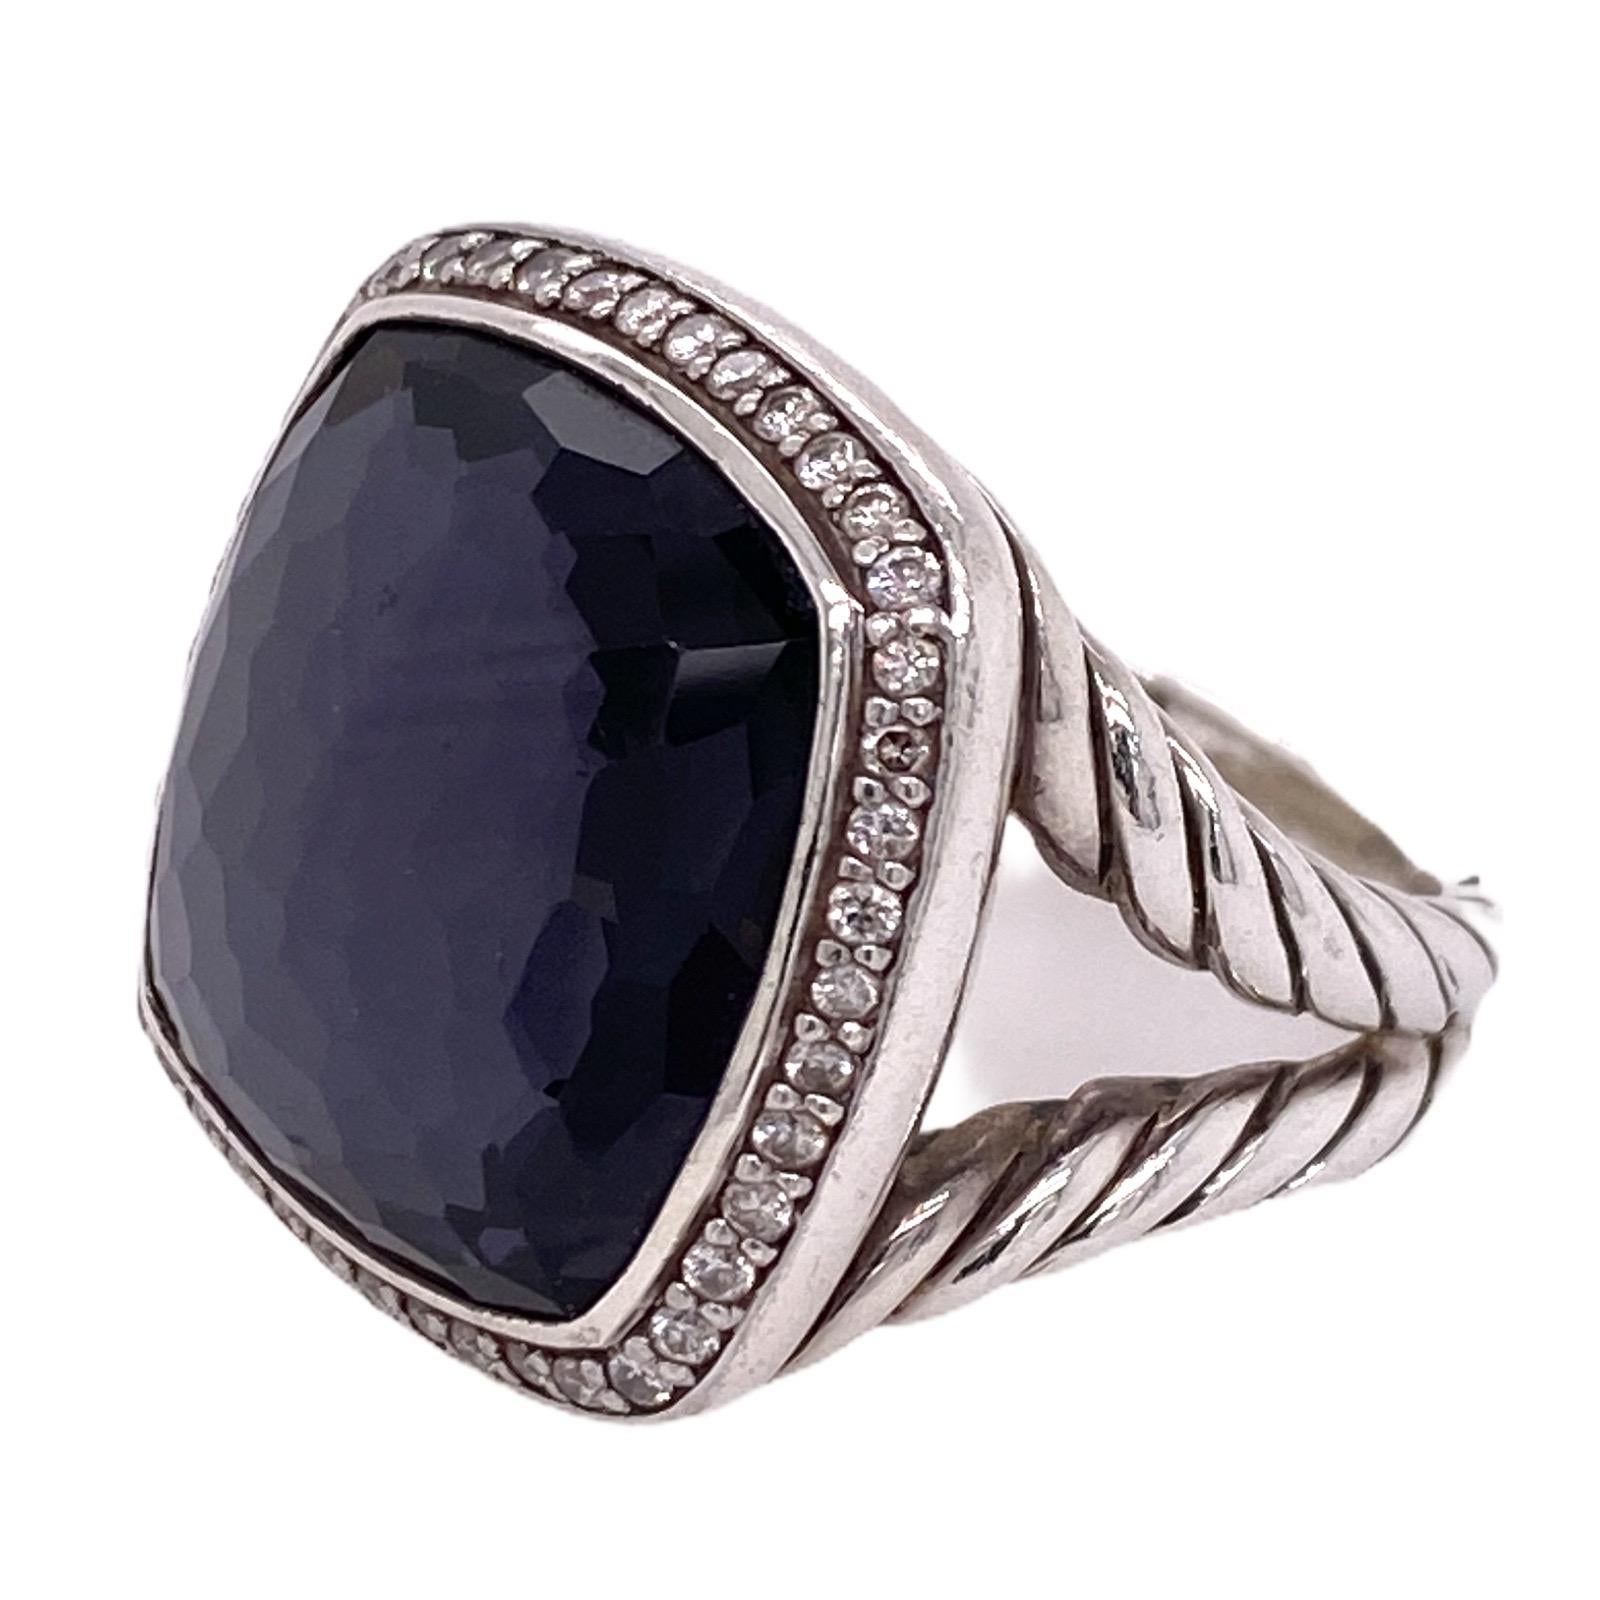 David Yurman Albion Black Orchid Diamond Ring Fashioned in Sterling Silver. The faceted black orchid gemstone (a fusion of hematite and lavendar amethyst gemstones) measures 17 x 17mm, and is surrounded by round brilliant cut diamonds weighing